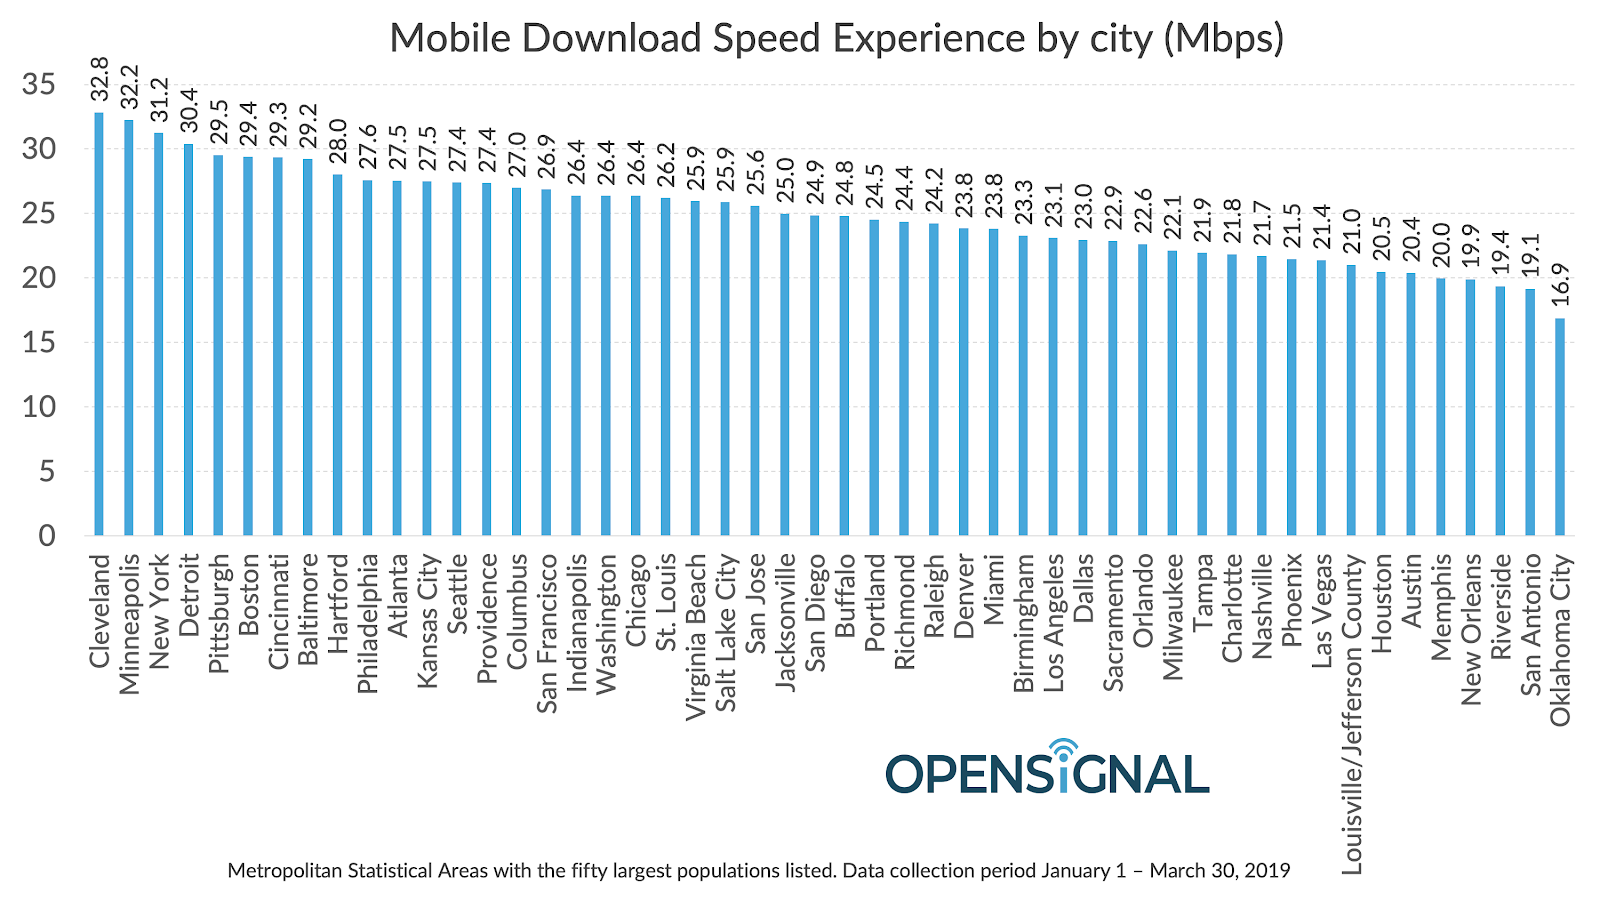 US state and city mobile network speeds